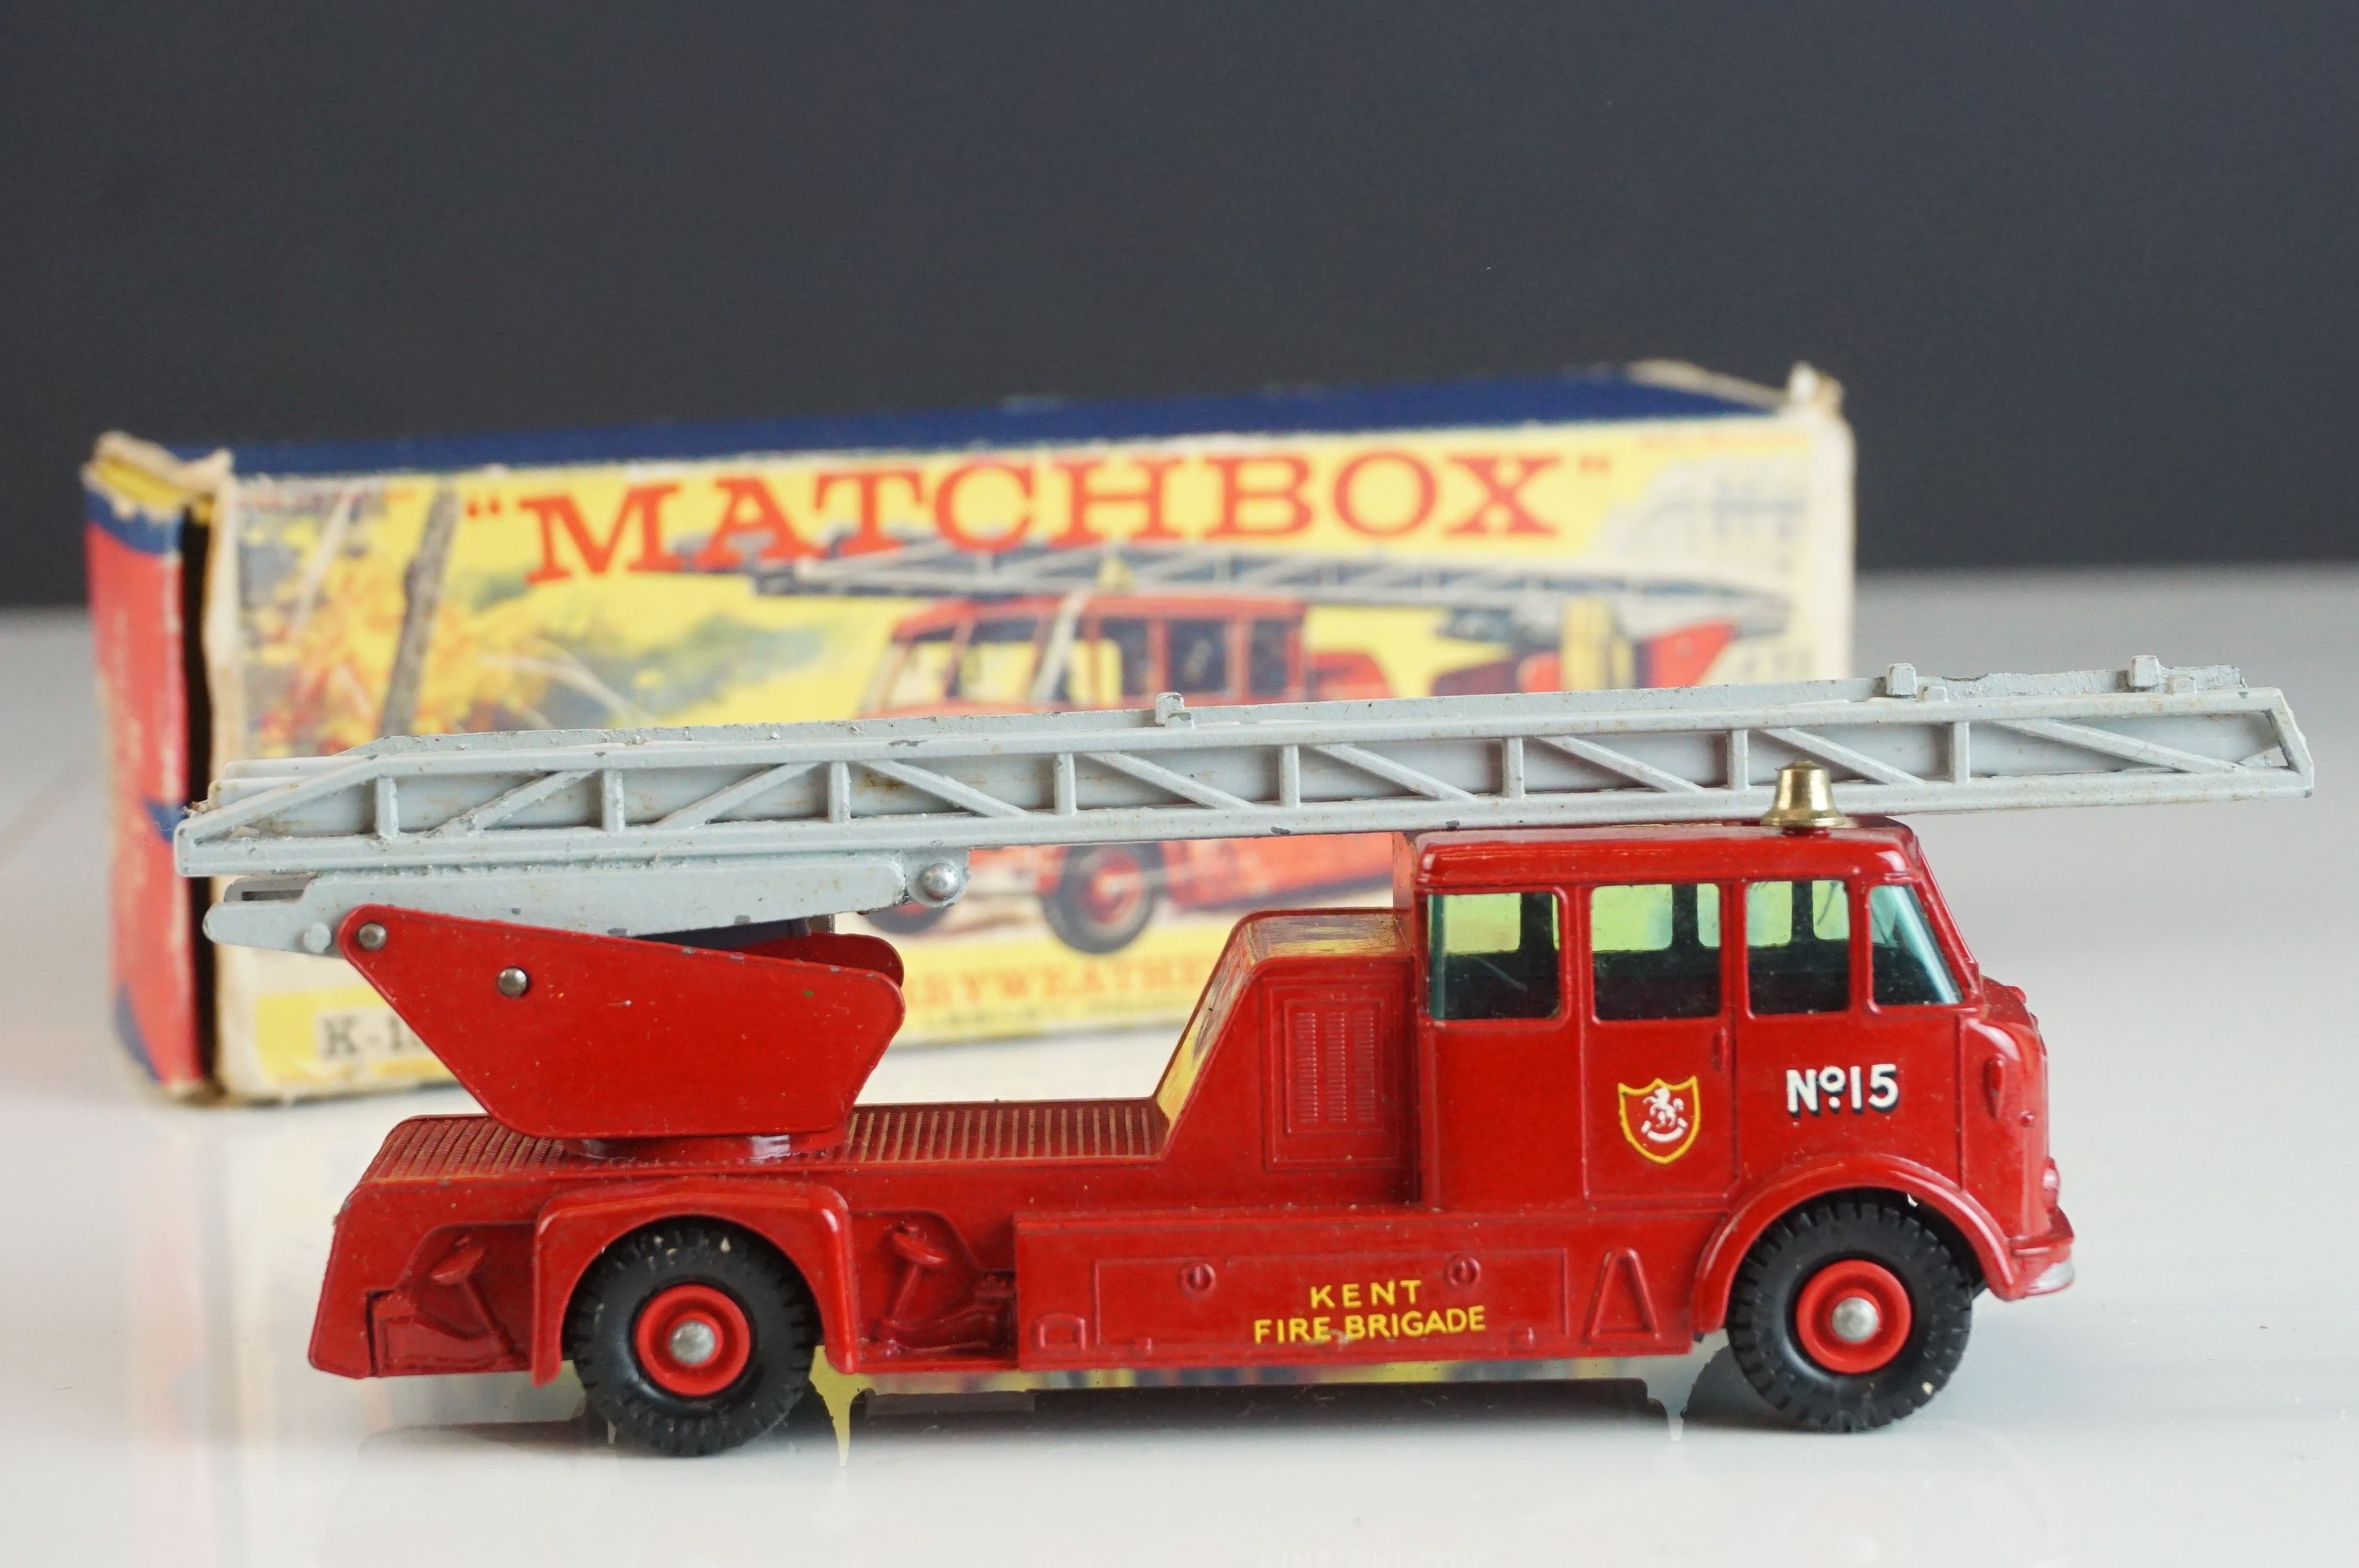 Boxed Matchbox K15 King Size Merryweather Fire Engine diecast model in vg condition with minimal - Image 4 of 8